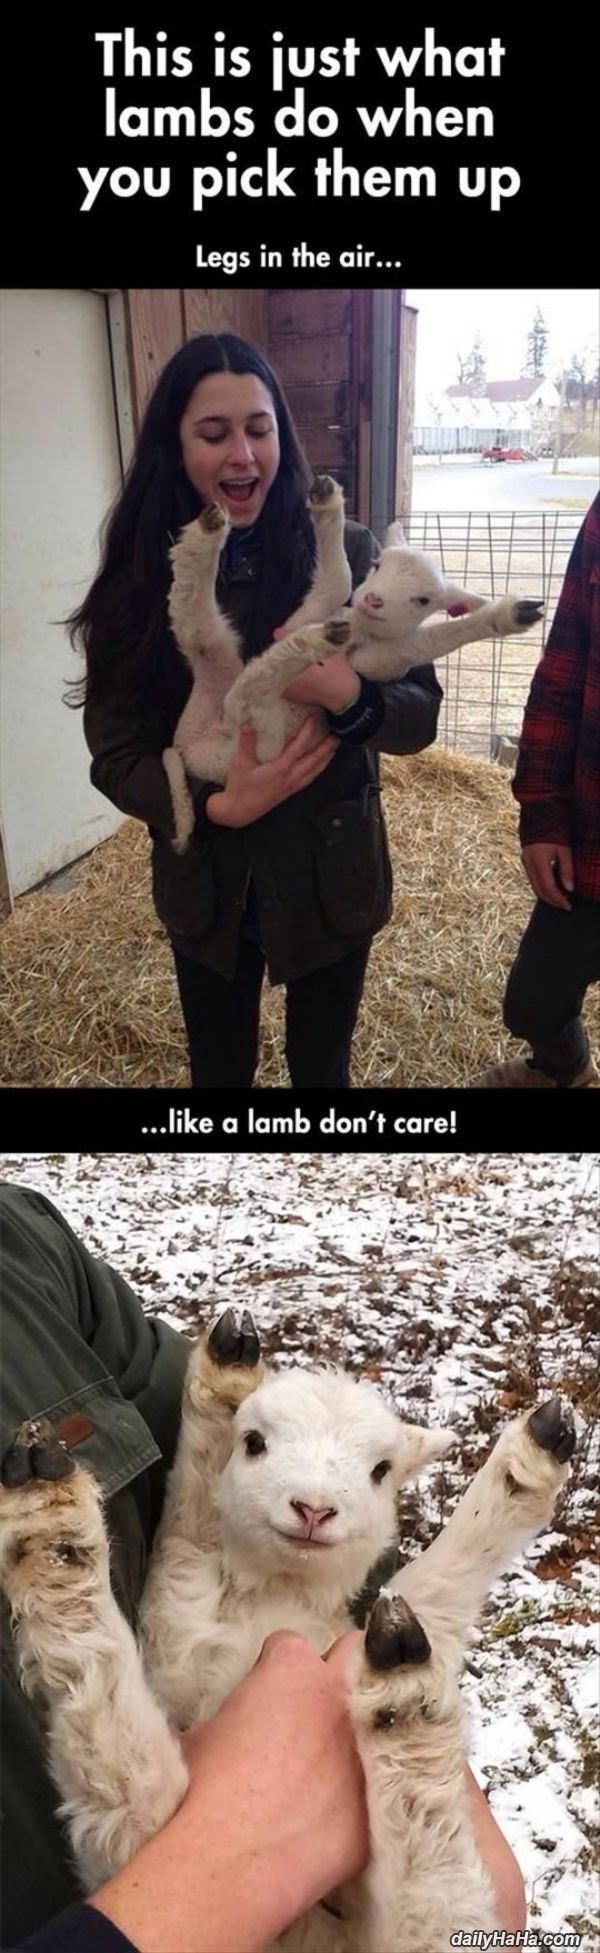 lambs funny picture